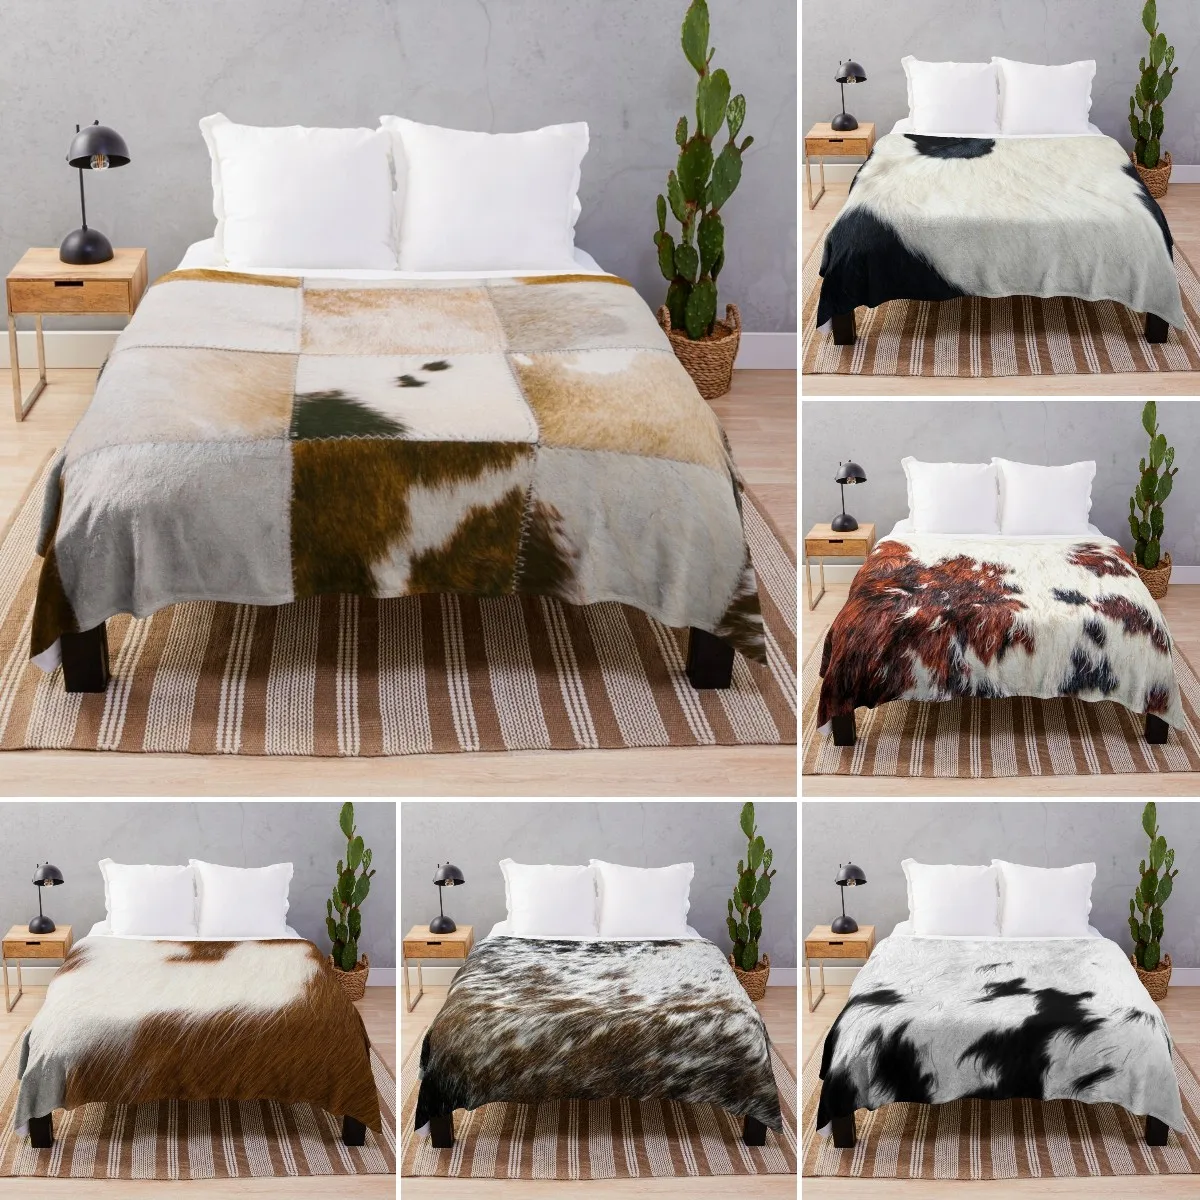 

Cowhide Flannel Throw Blanket Brown Black White Colour Fur for Bed Sofa Couch King Queen Size Blanket Super Soft Lightweight